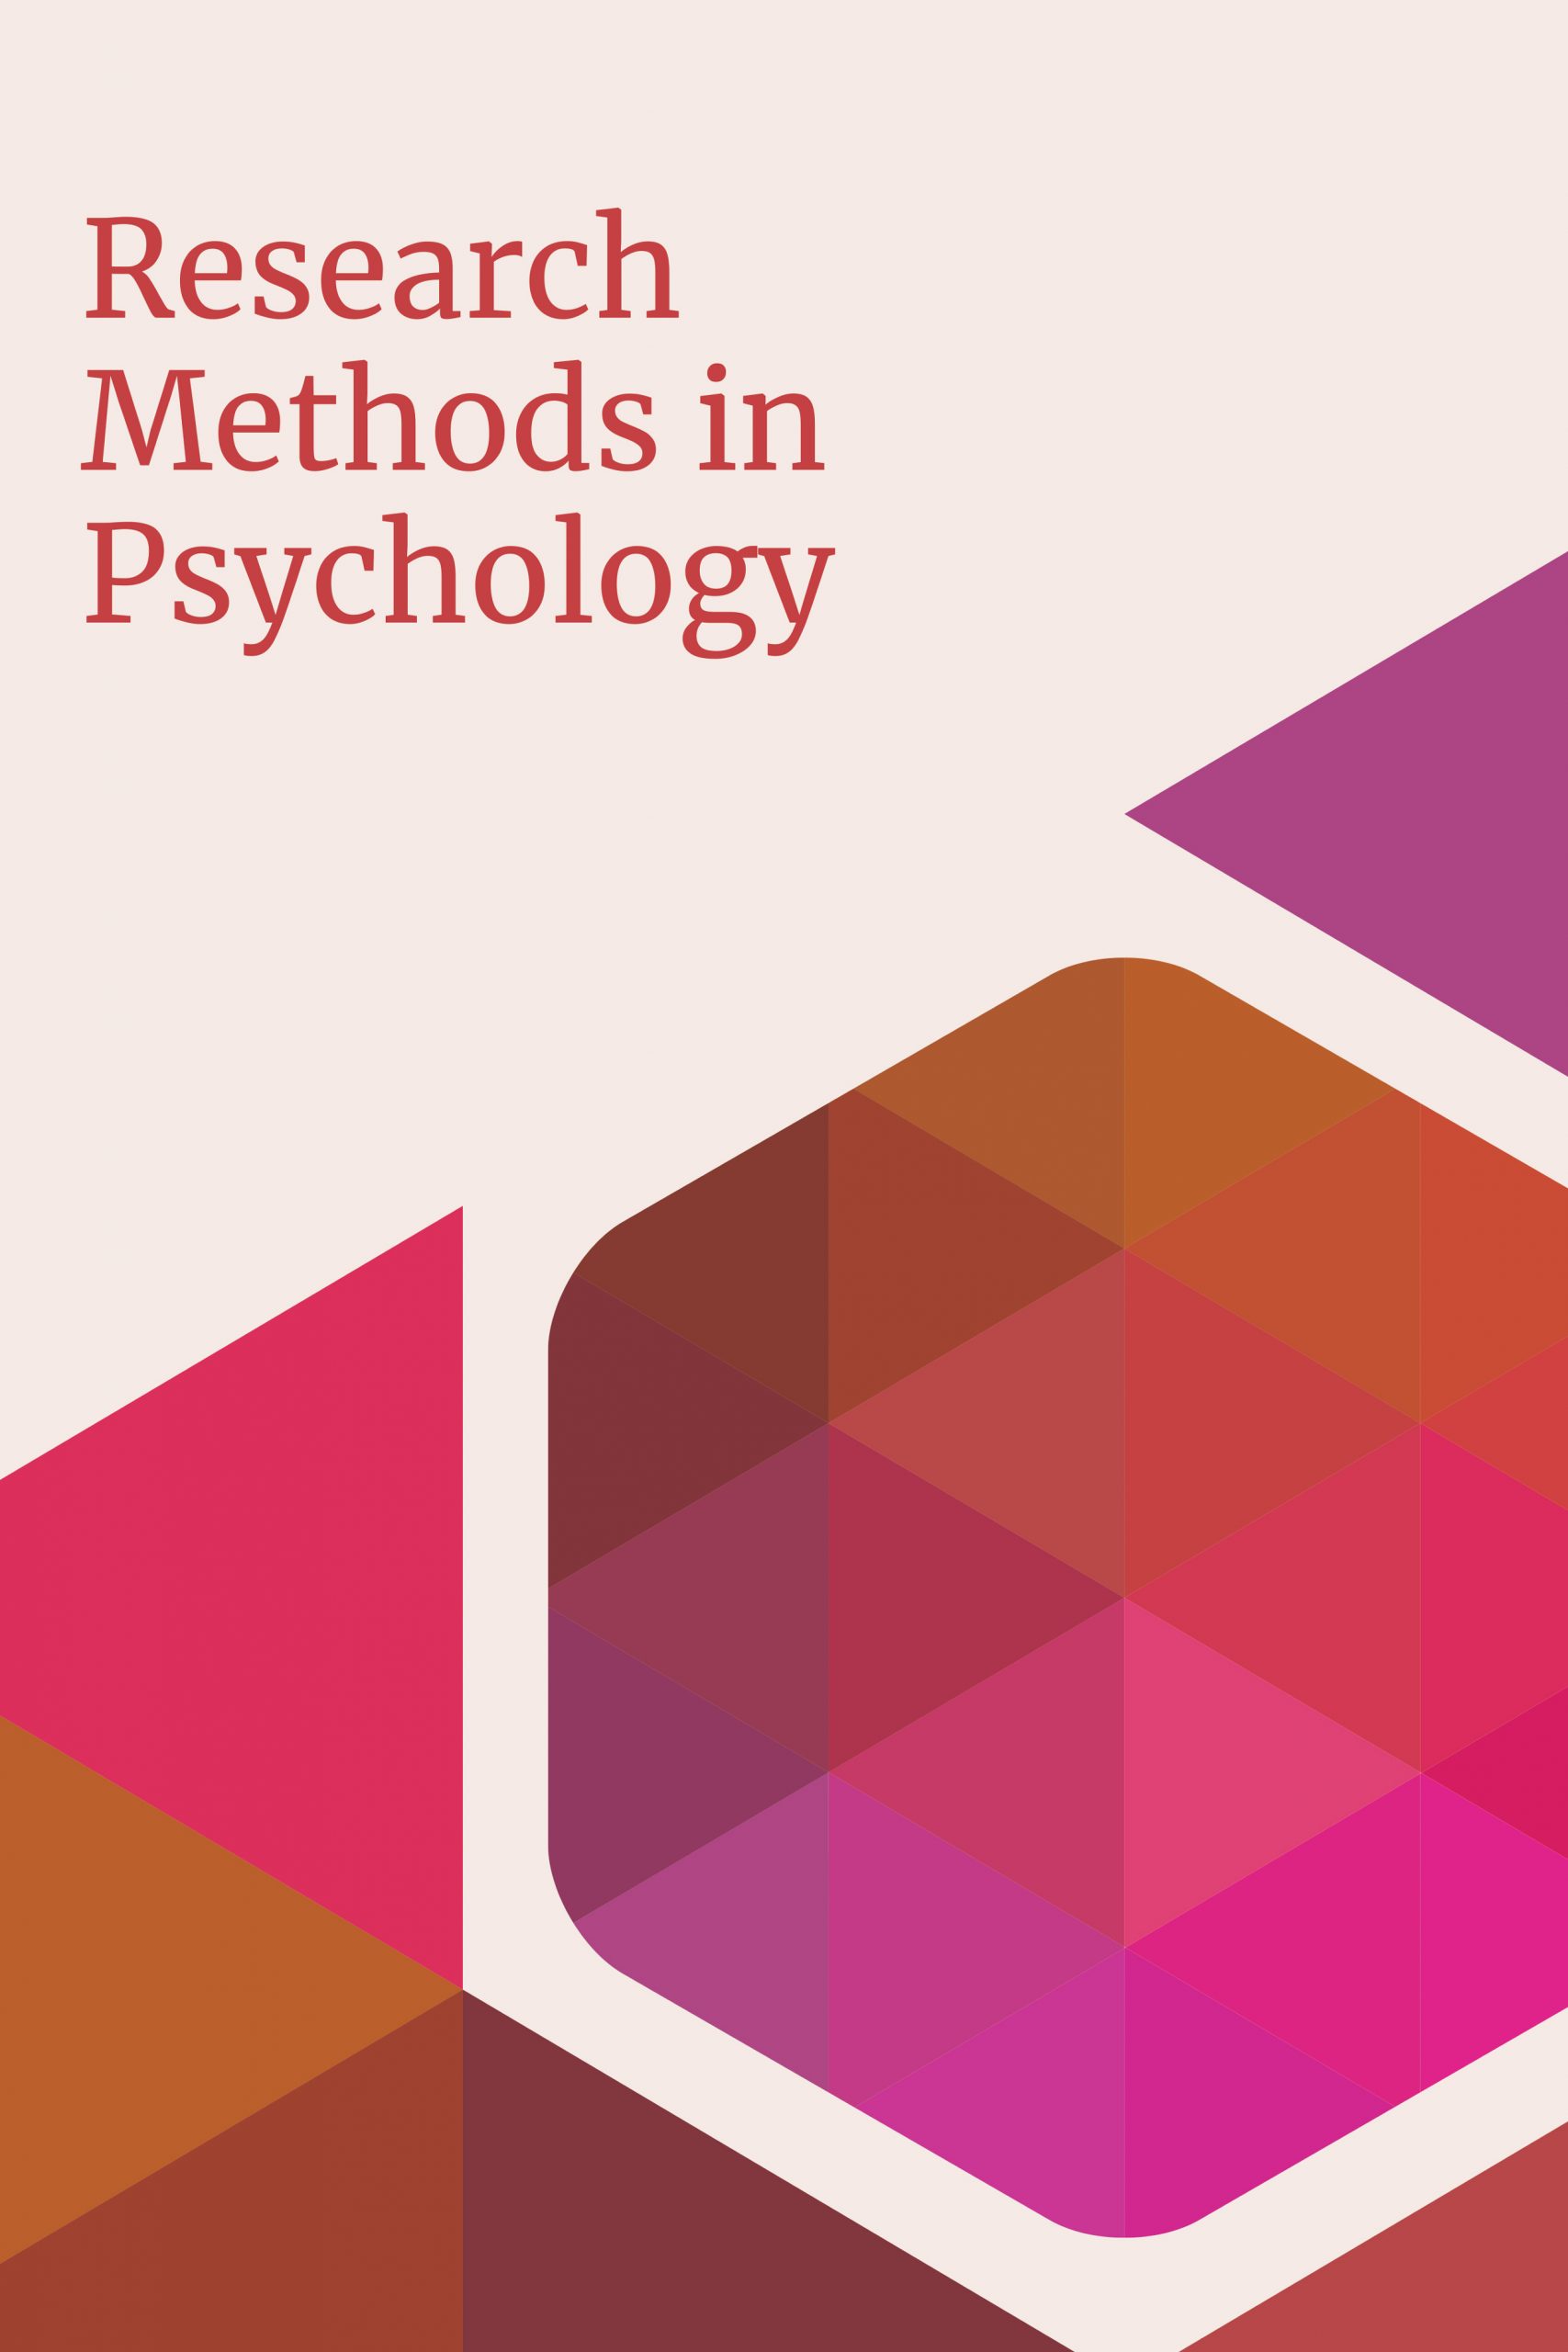 what are the five research methods in psychology